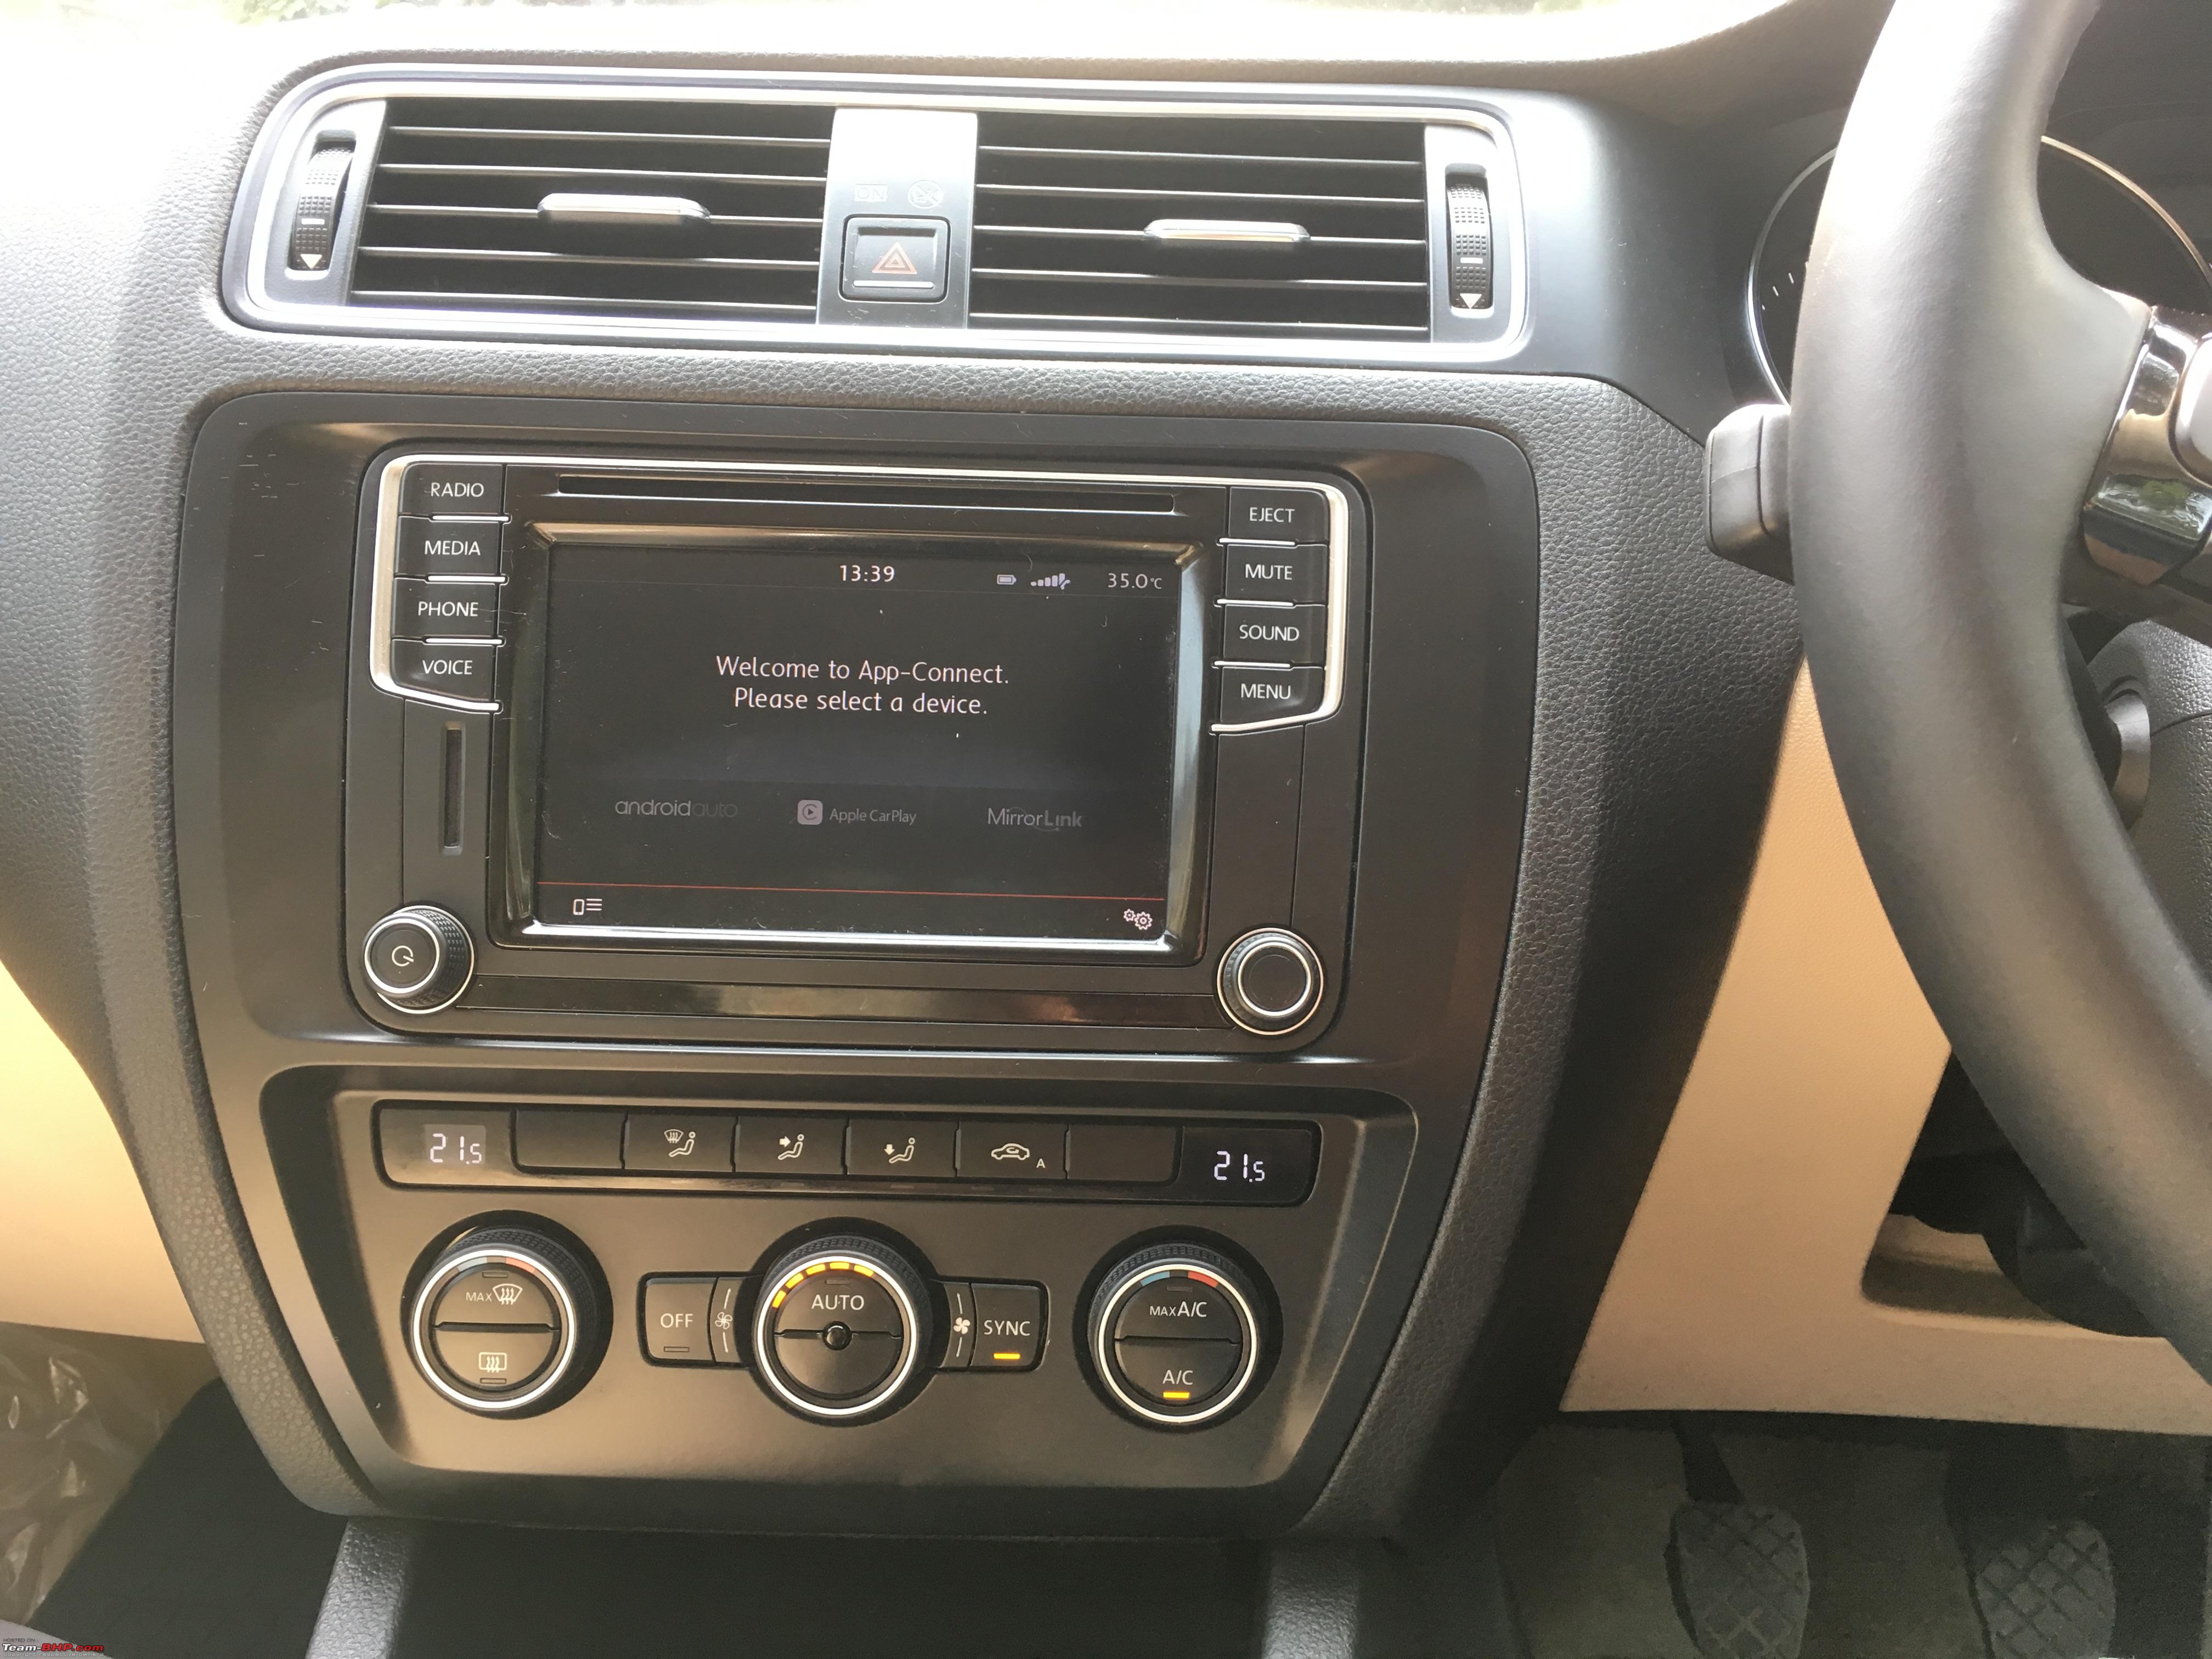 1576146d1479382643 vw owners now get apple carplay android auto your head unit mib ii image2